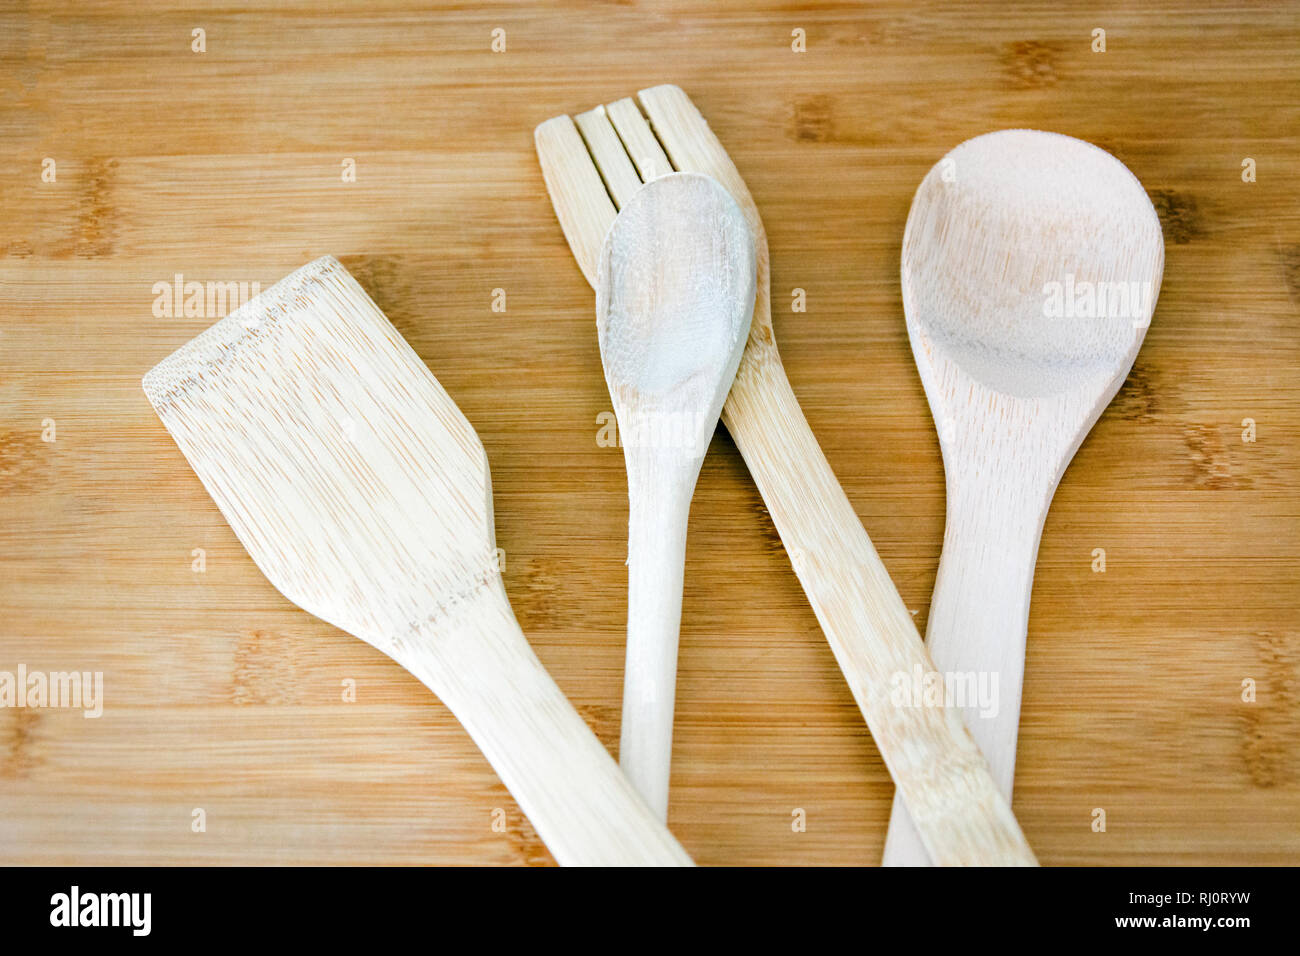 Close up of a group of wooden kitchen utensils on a wooden table Stock Photo